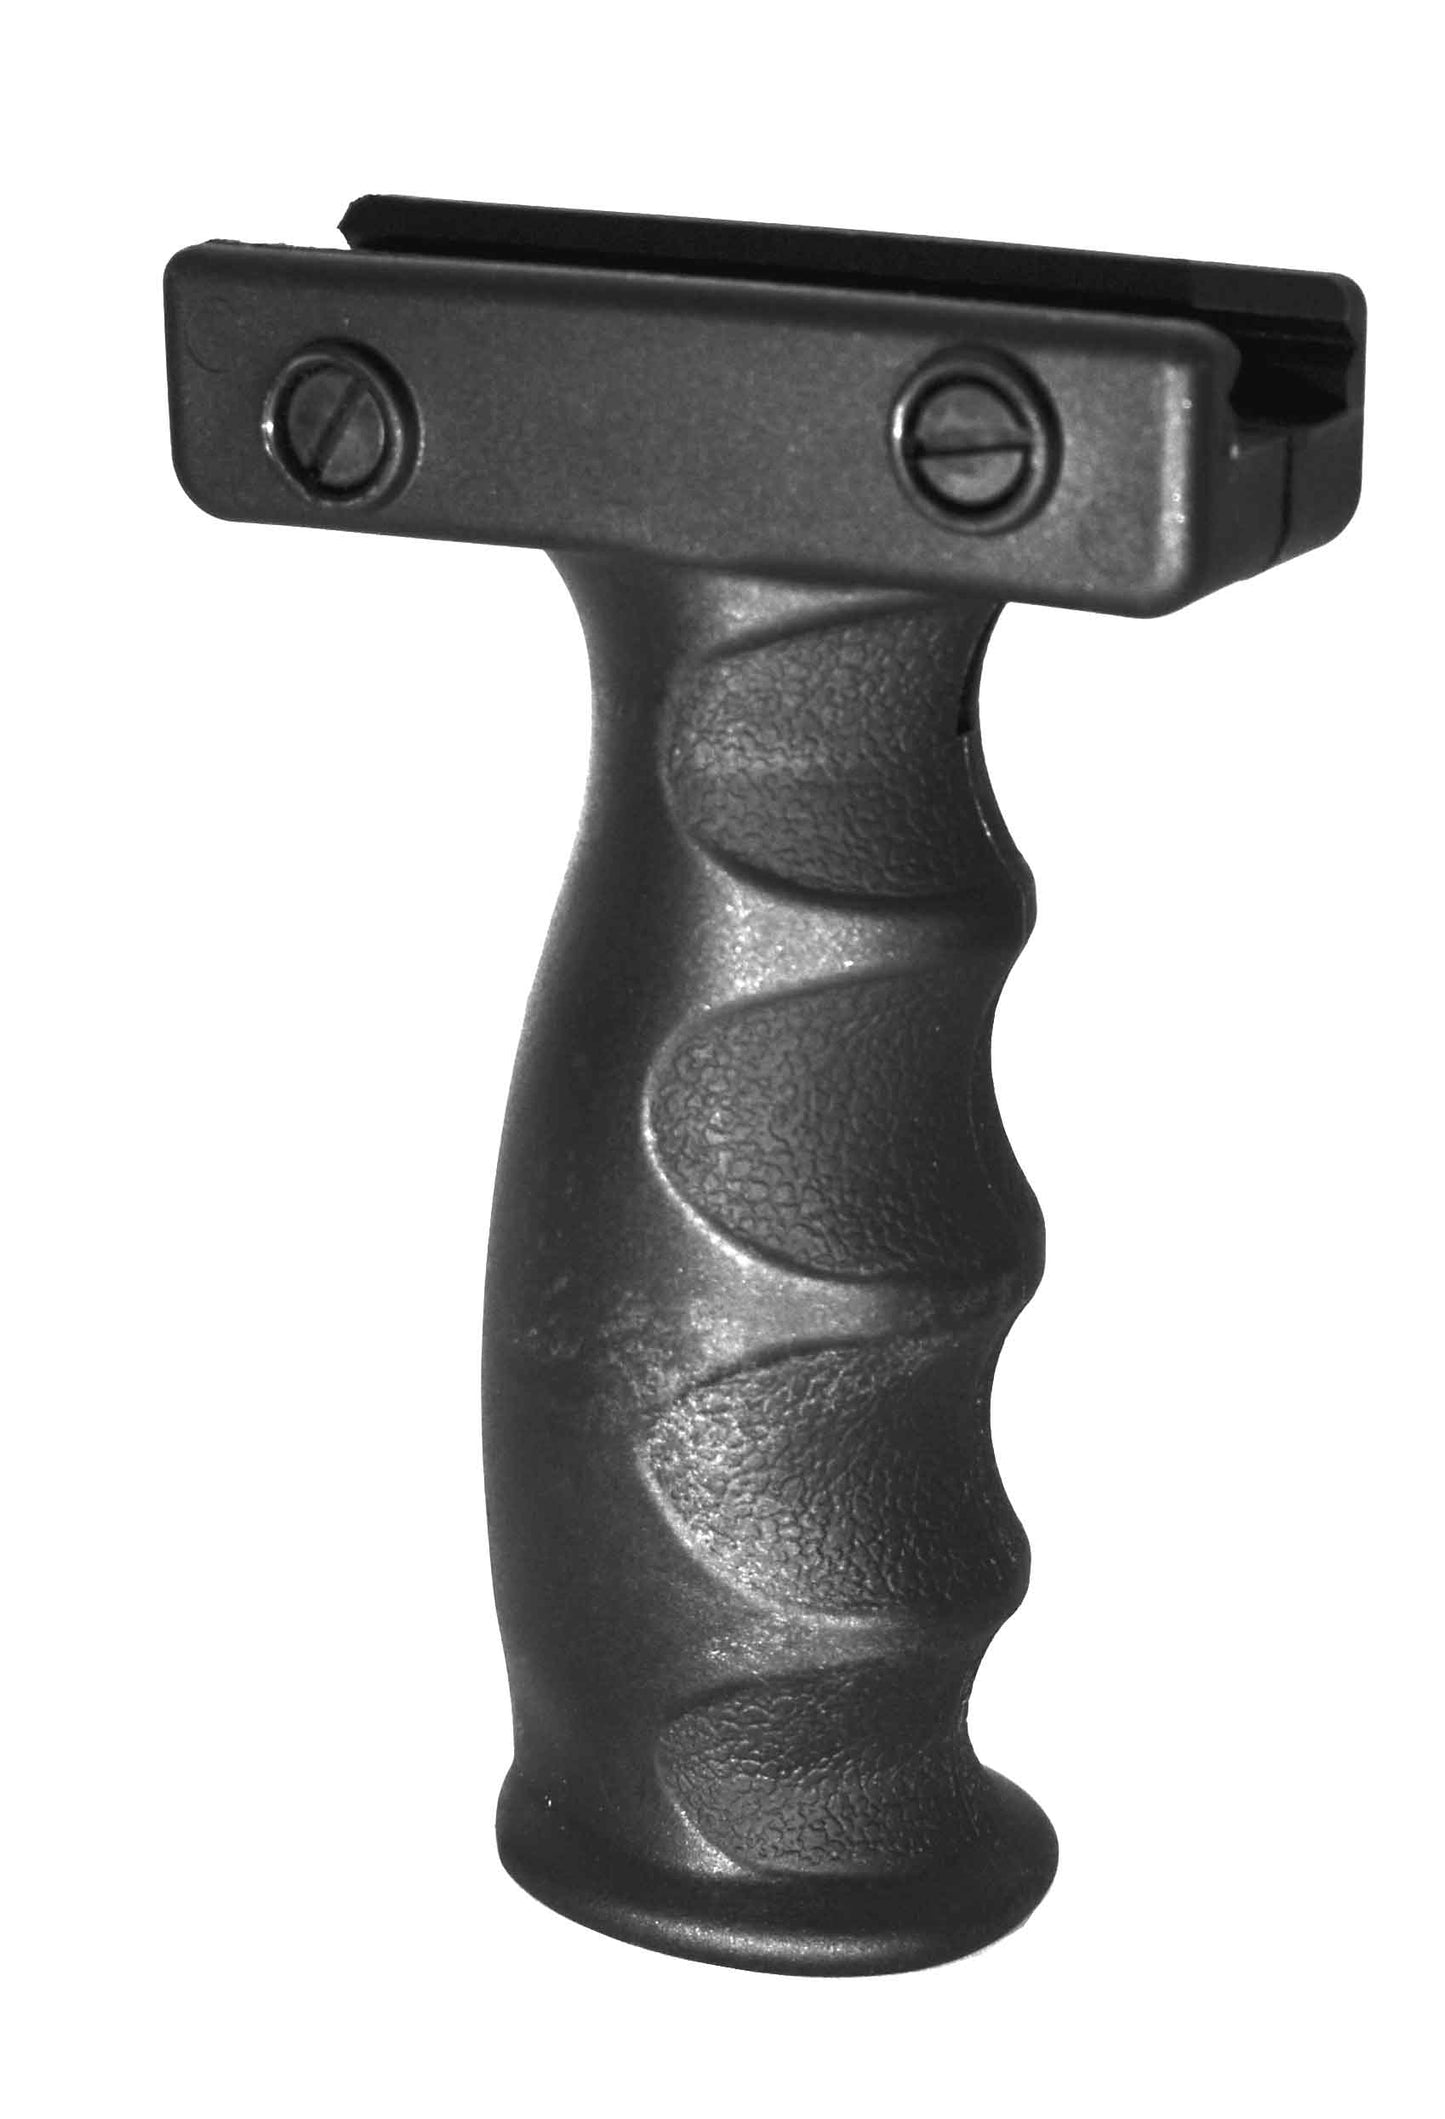 Mossberg 500 12 Gauge forend Pump handguard with side rails and tactical grip black hunting tactical home defense.